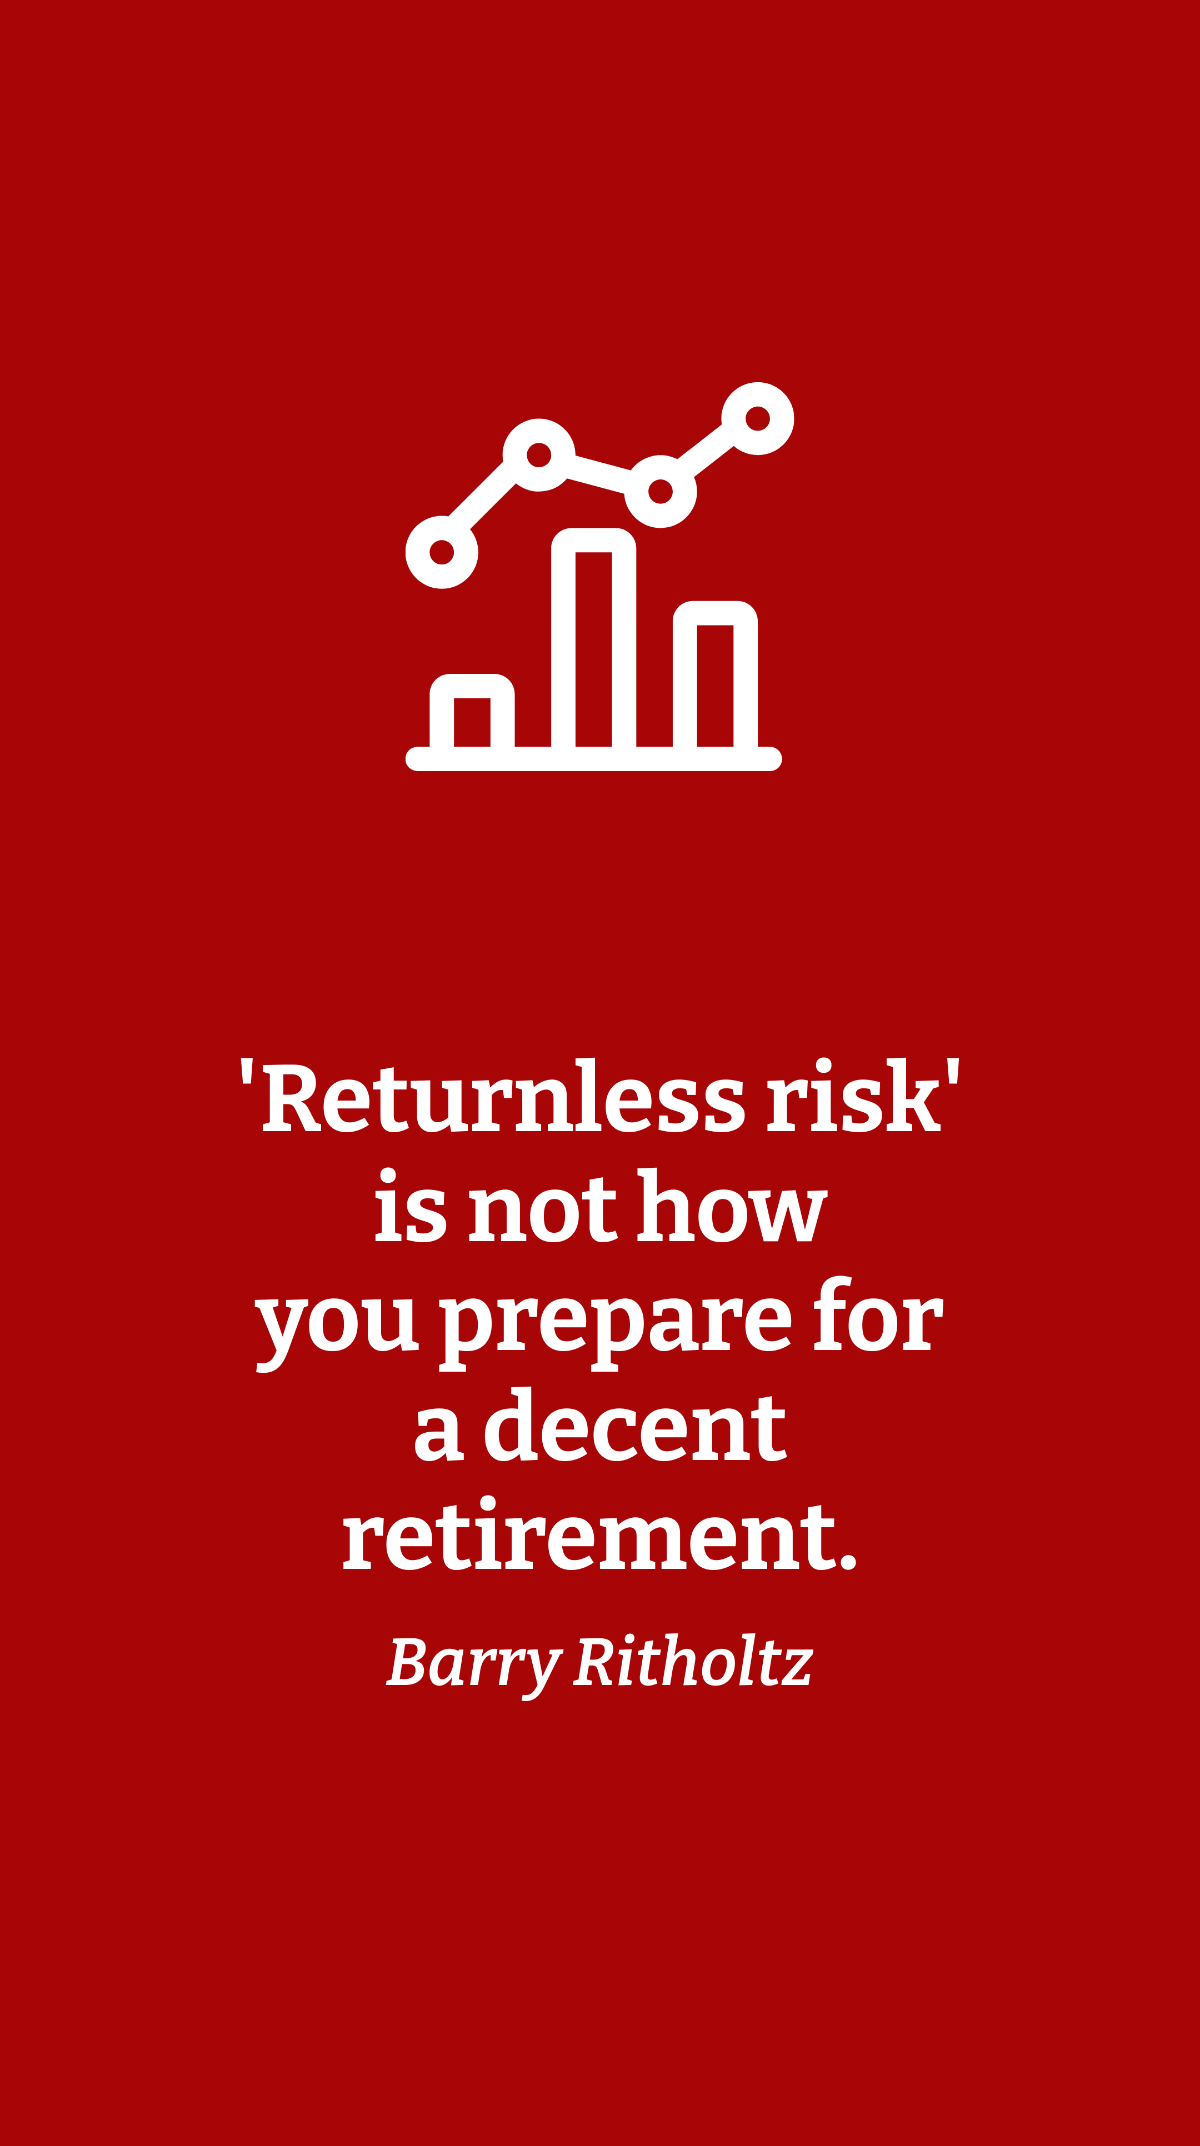 Barry Ritholtz - 'Returnless risk' is not how you prepare for a decent retirement. Template